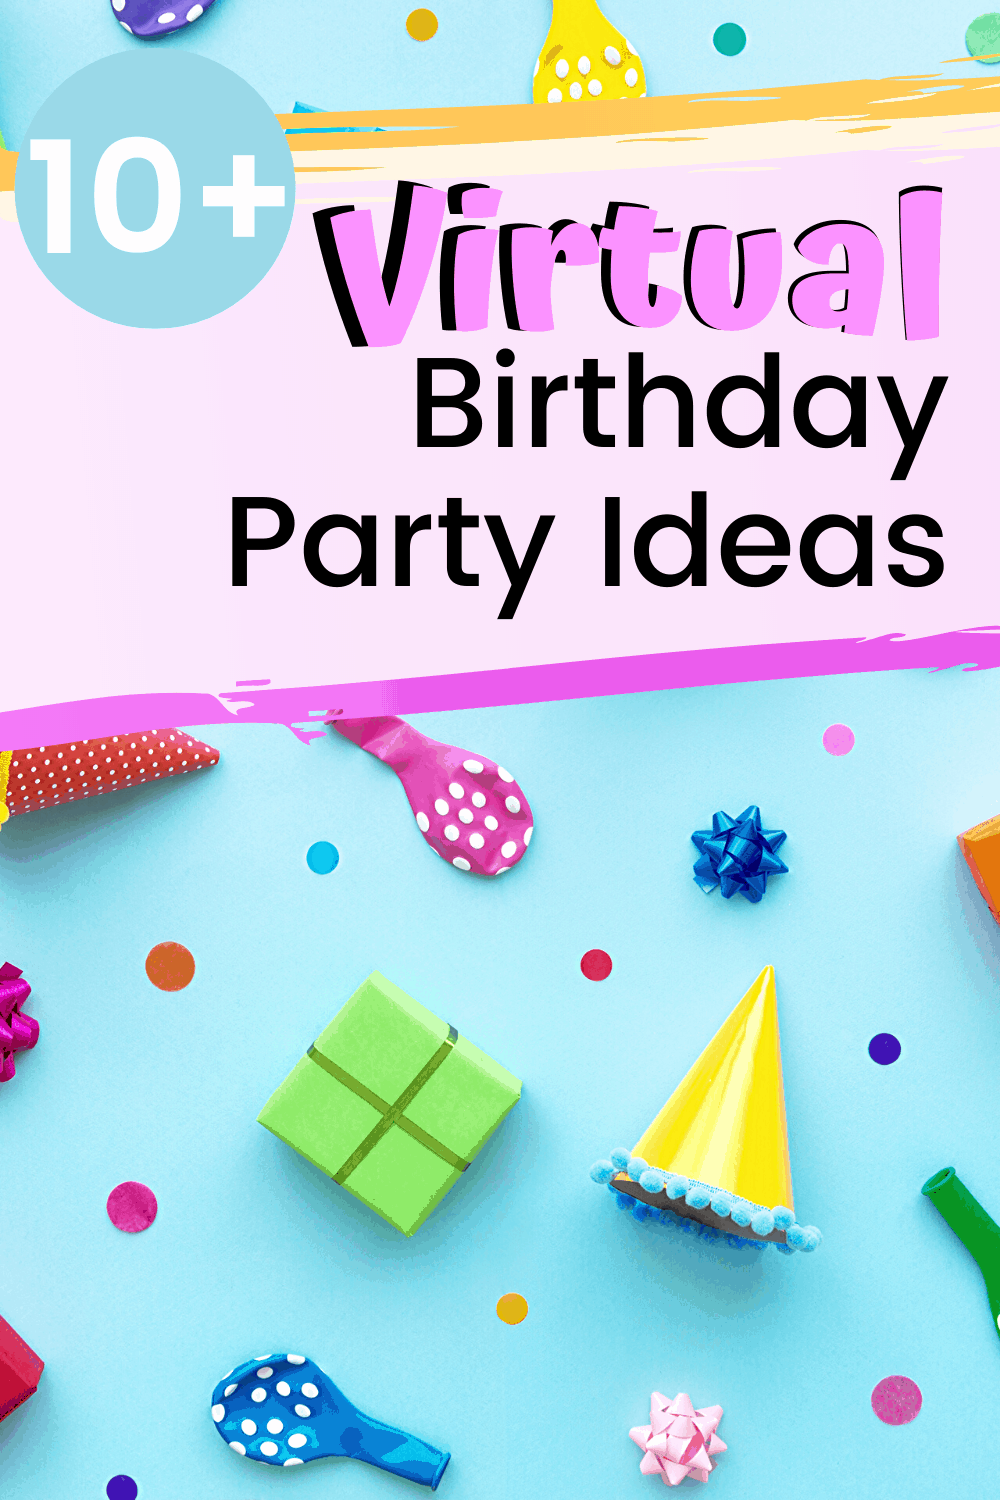 These virtual birthday party ideas are a great way to create a special day when you can't be together! Long distance parties provide a unique way to celebrate.